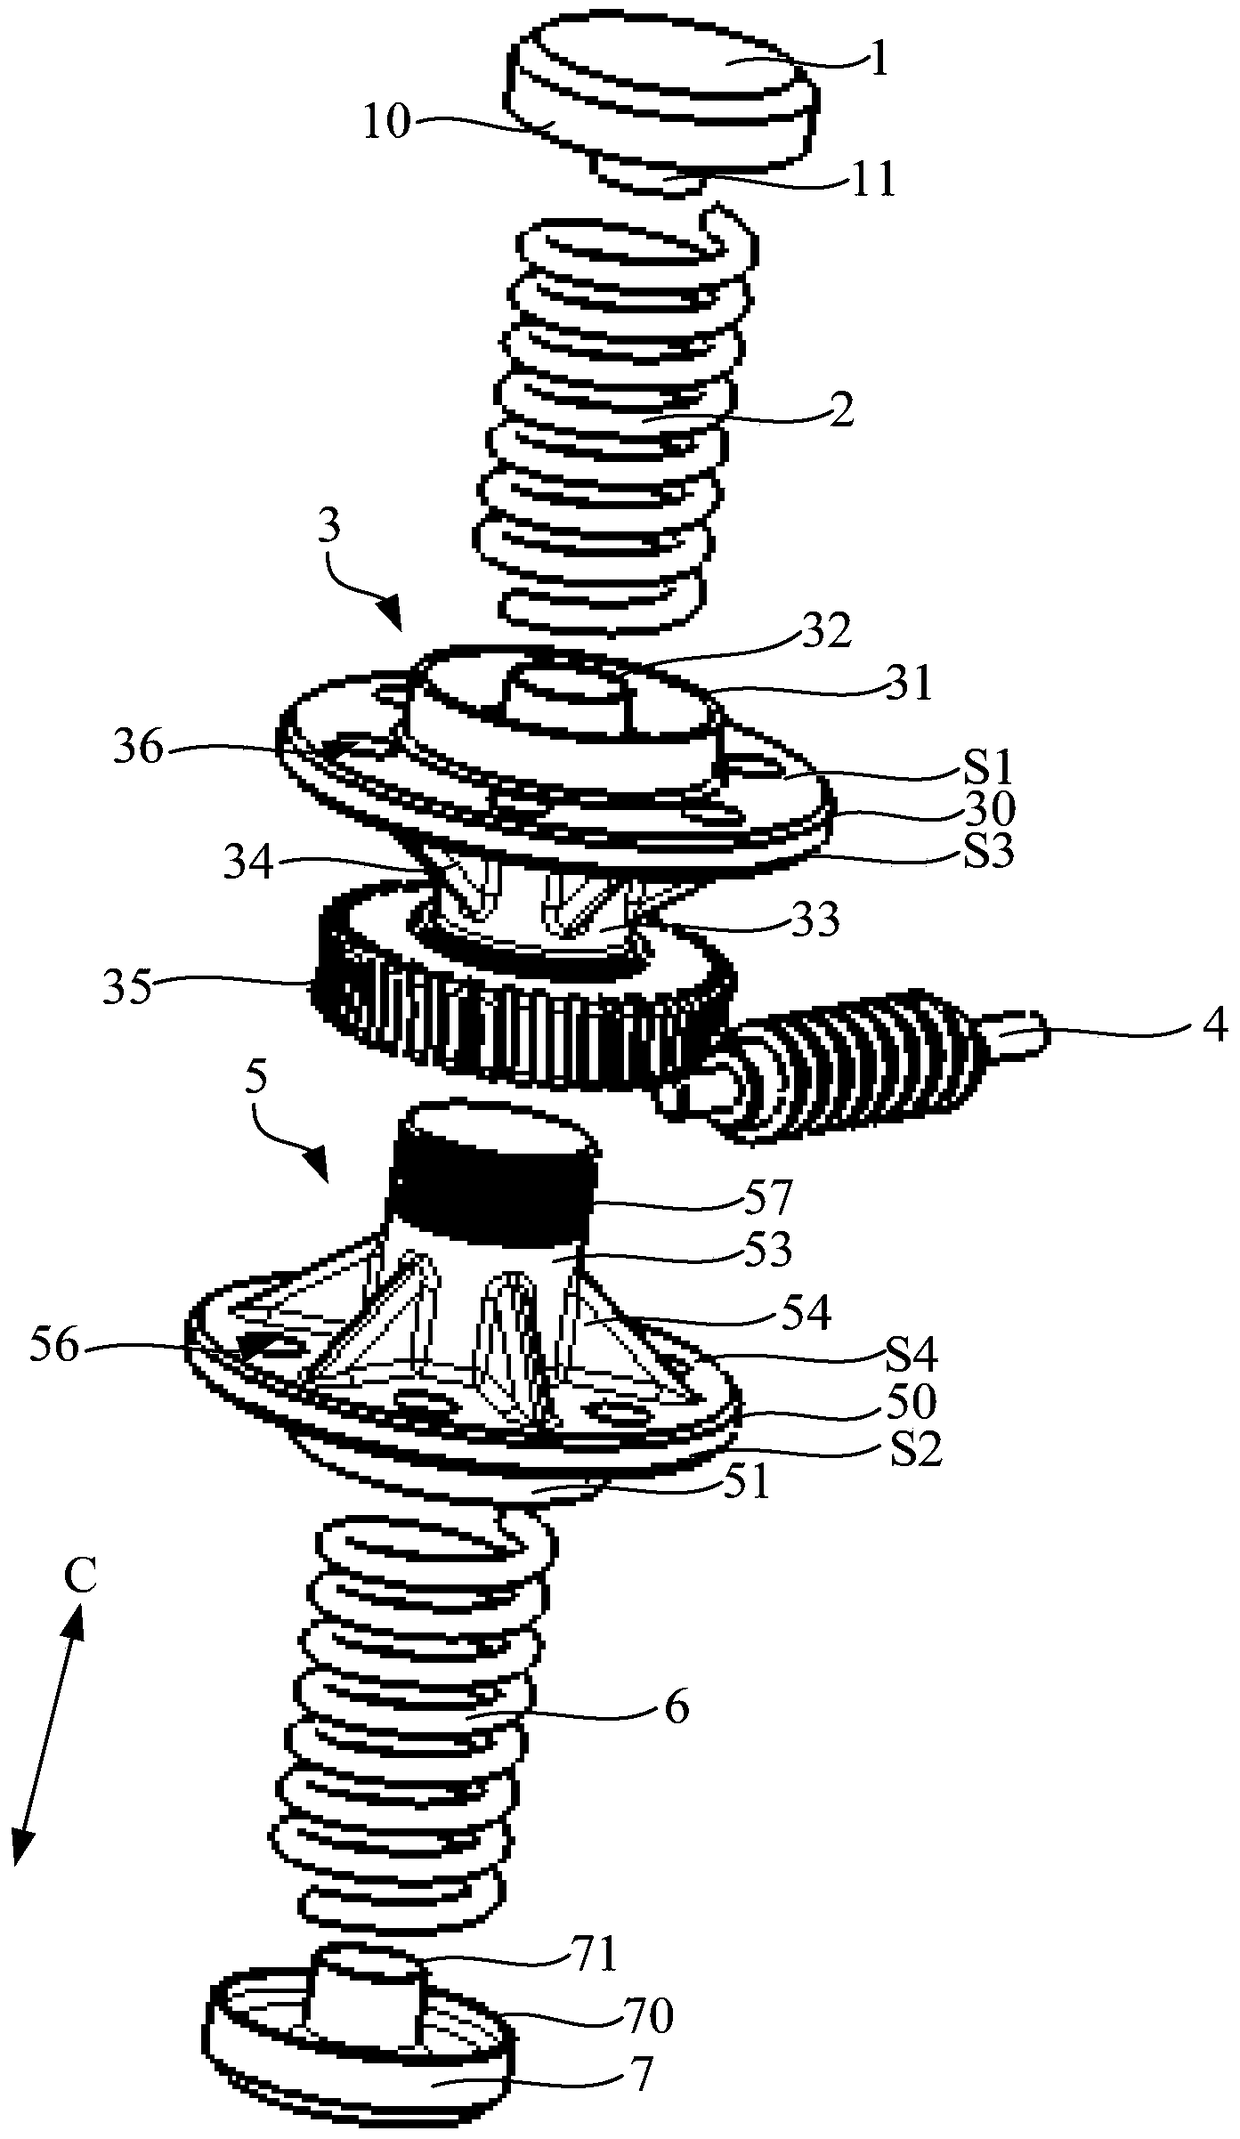 Vehicles and their suspensions, spring devices for suspensions